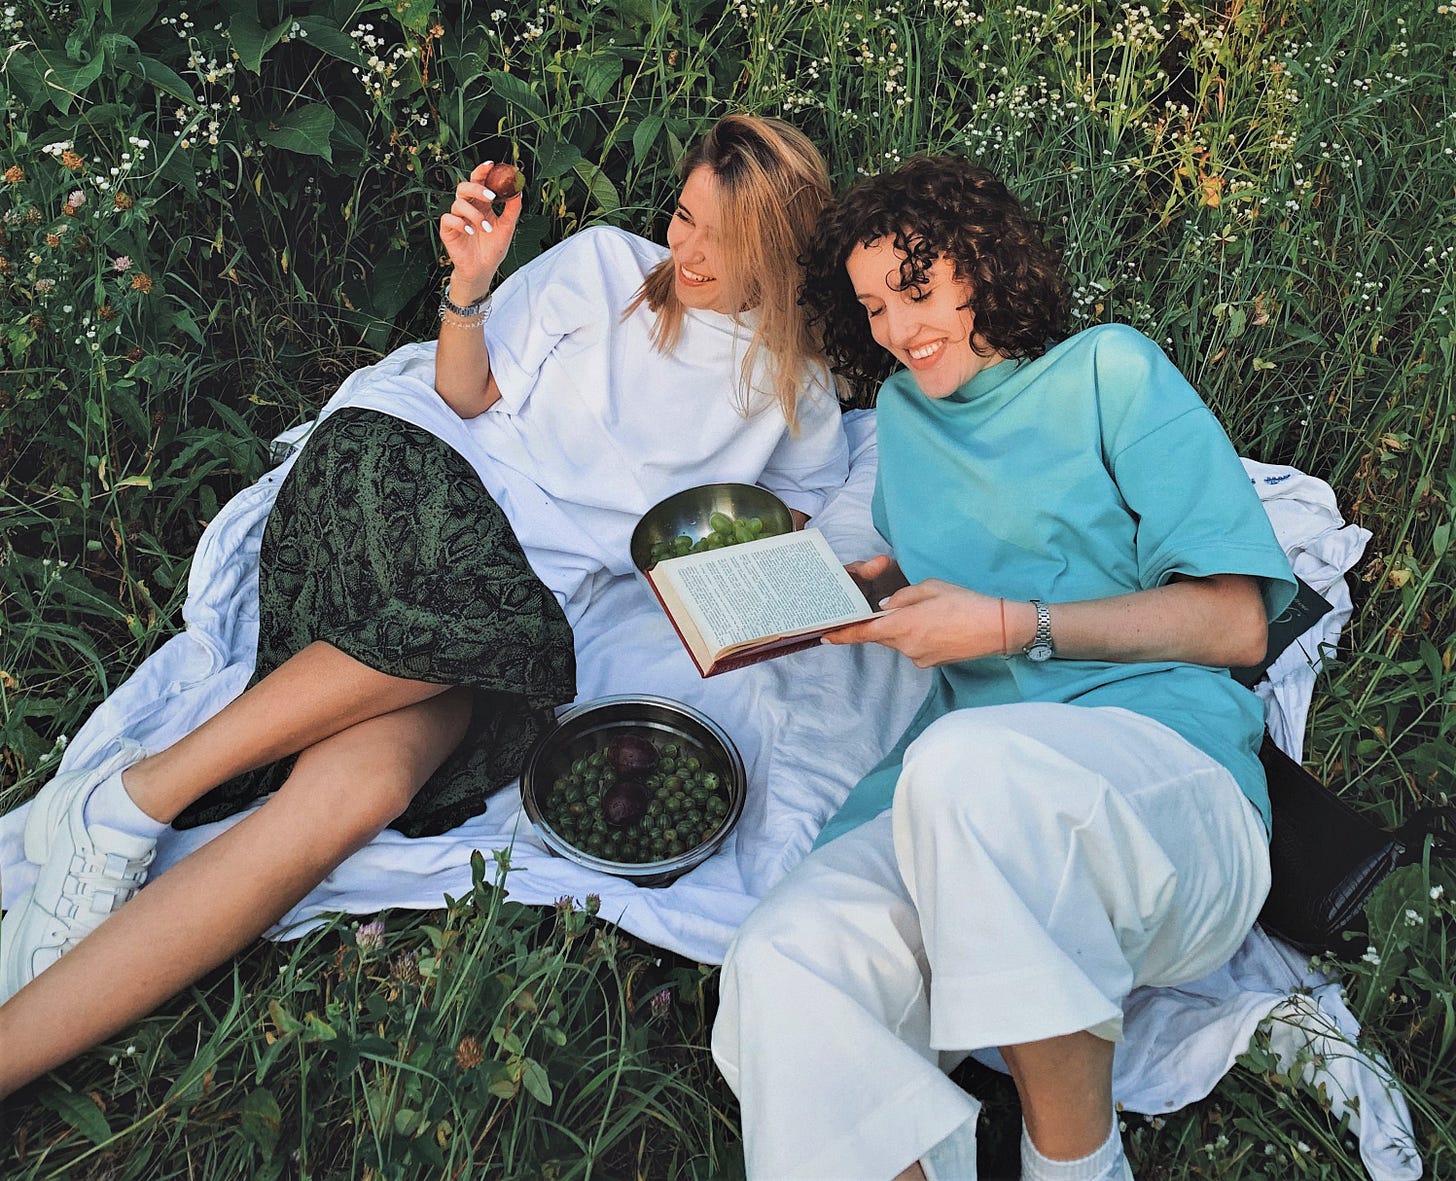 two girls laying on blanket in a green field reading a book and eating fruit